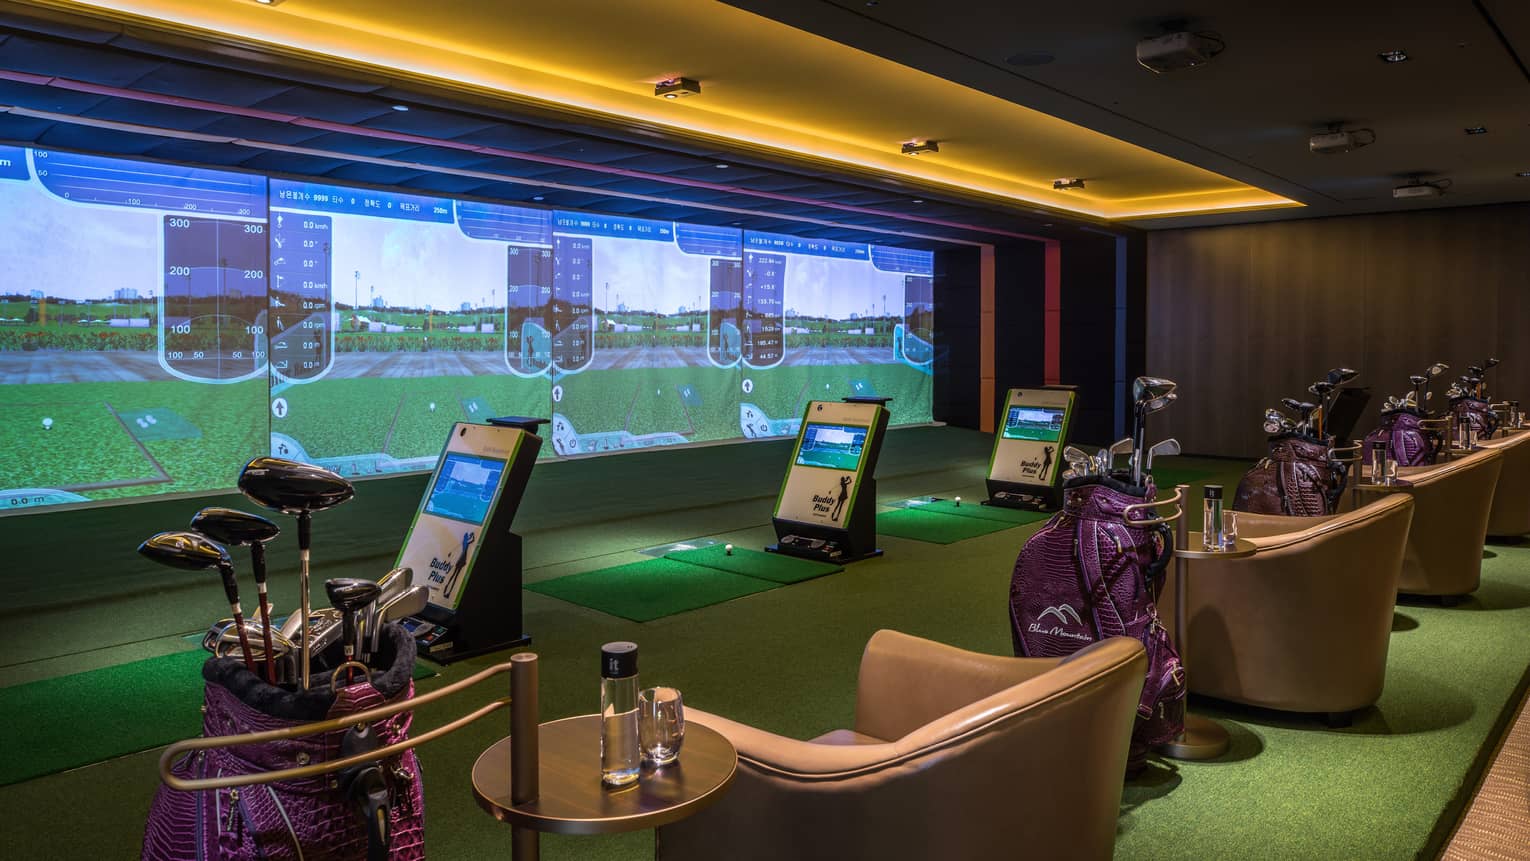 Wall with animated screens, 3D golf course game centre, armchairs with water bottles